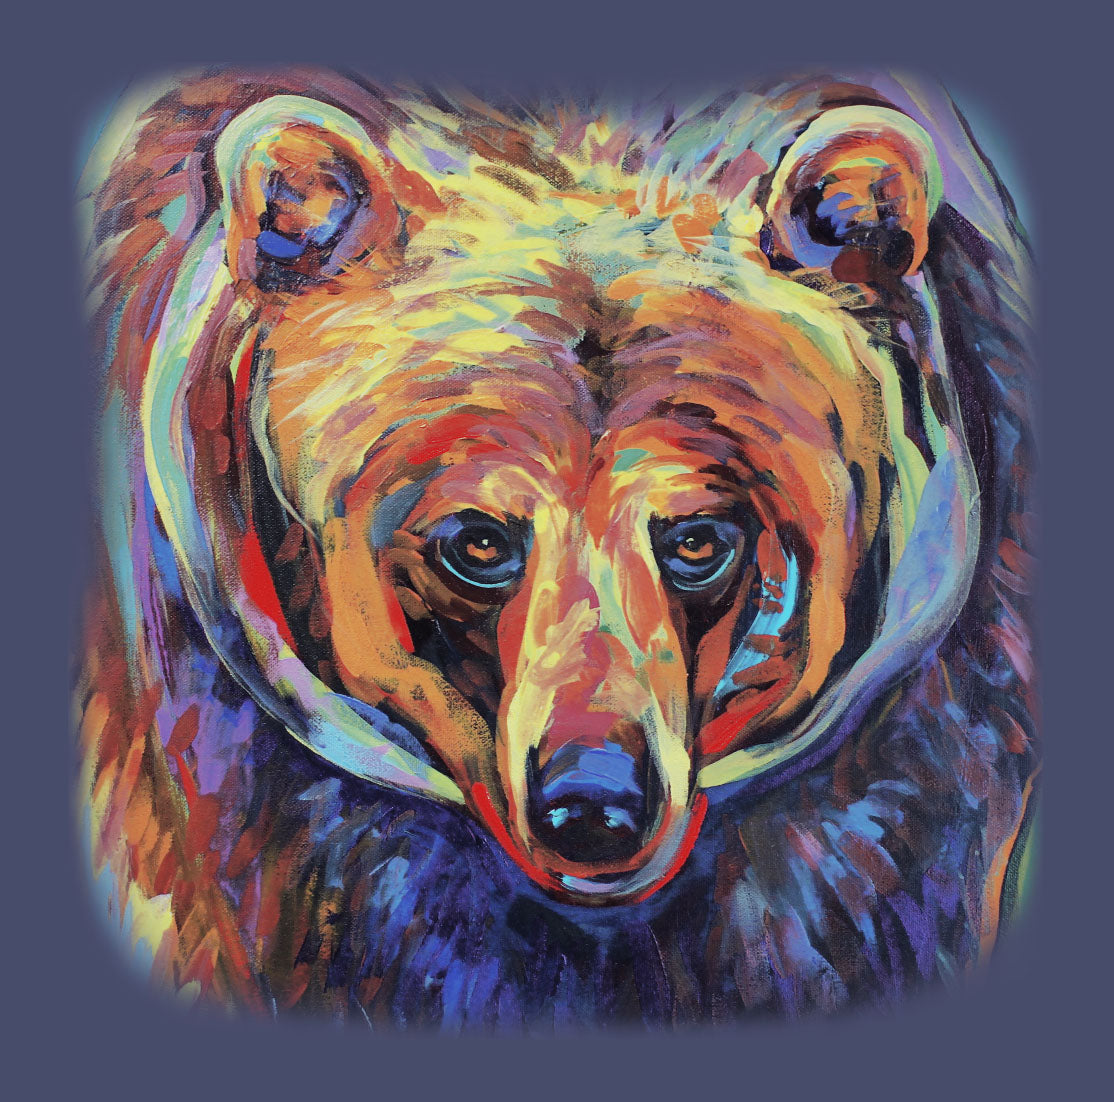 Grizzly Pride by Kari Lehr- colourful painting of grizzly bear head and shoulders